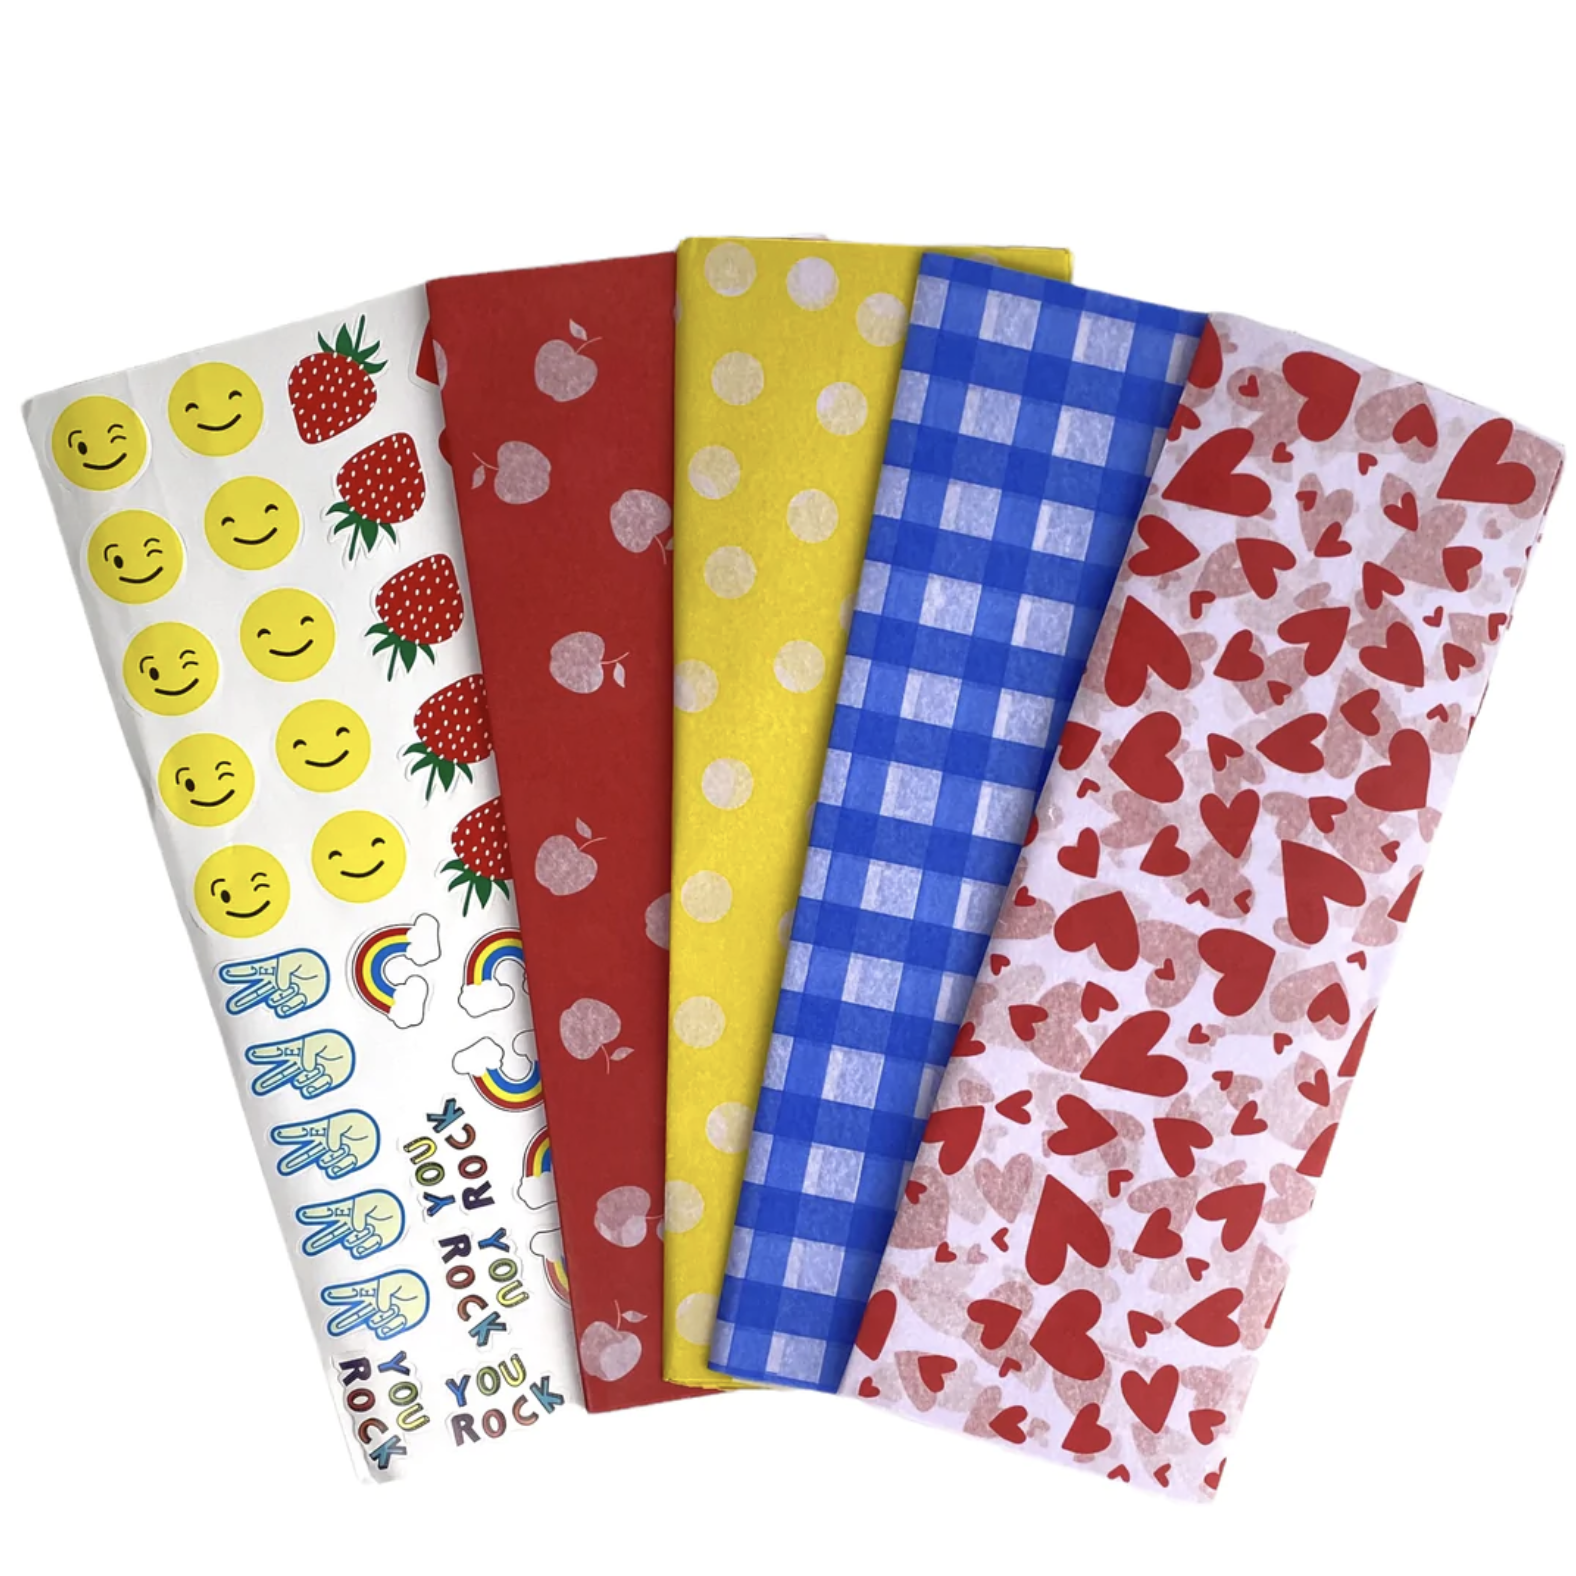 Fun prints sandwich wrapping papers and stickers. white apples on red paper, white dots on yellow, blue and white checkers, red hears on  white plus 40 fun stickers